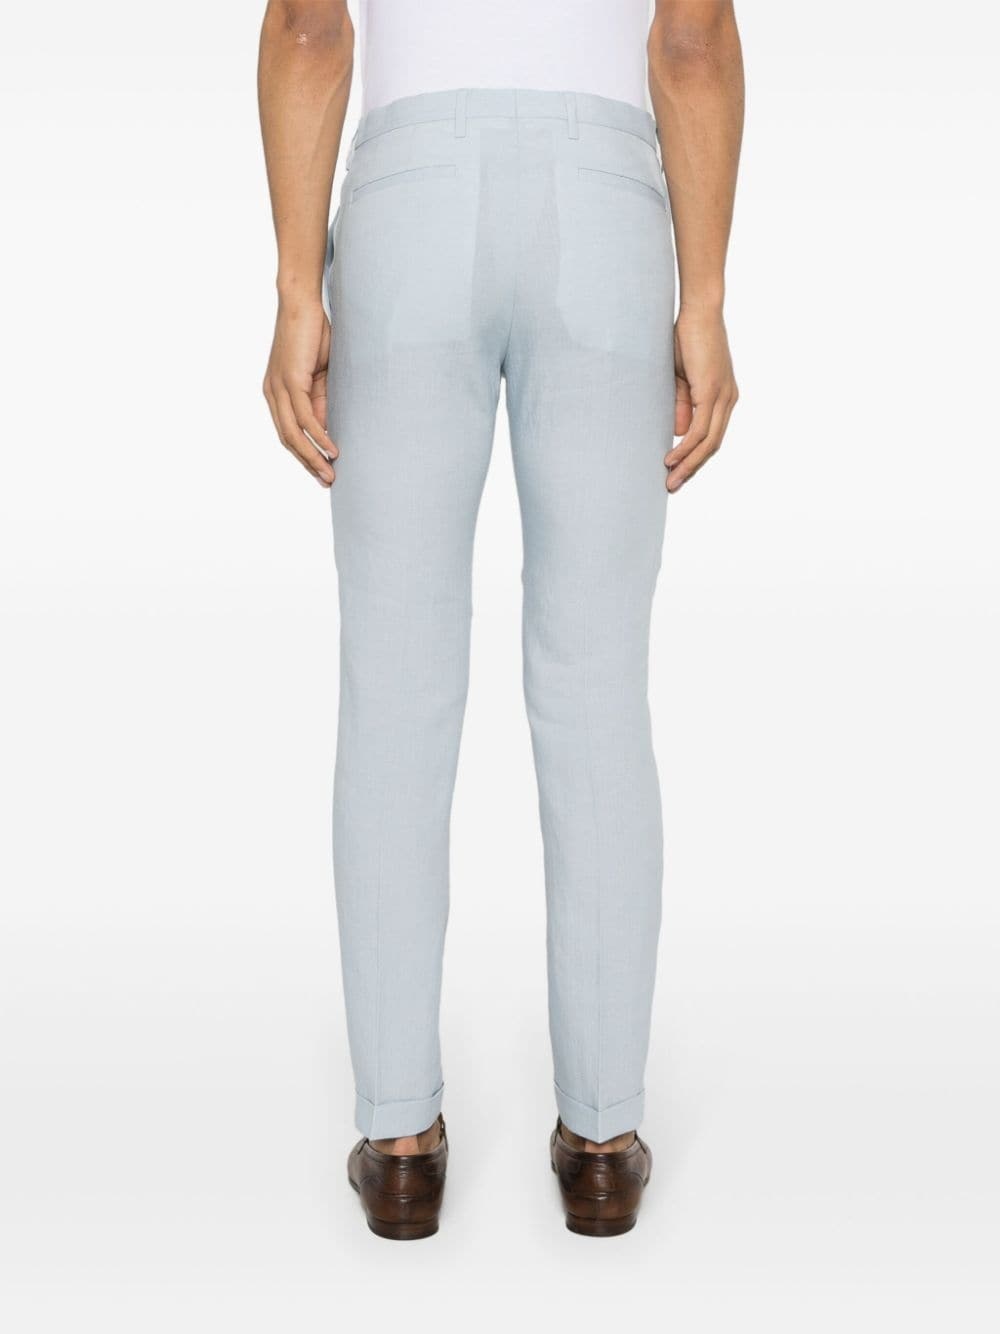 pressed-crease linen trousers - 4